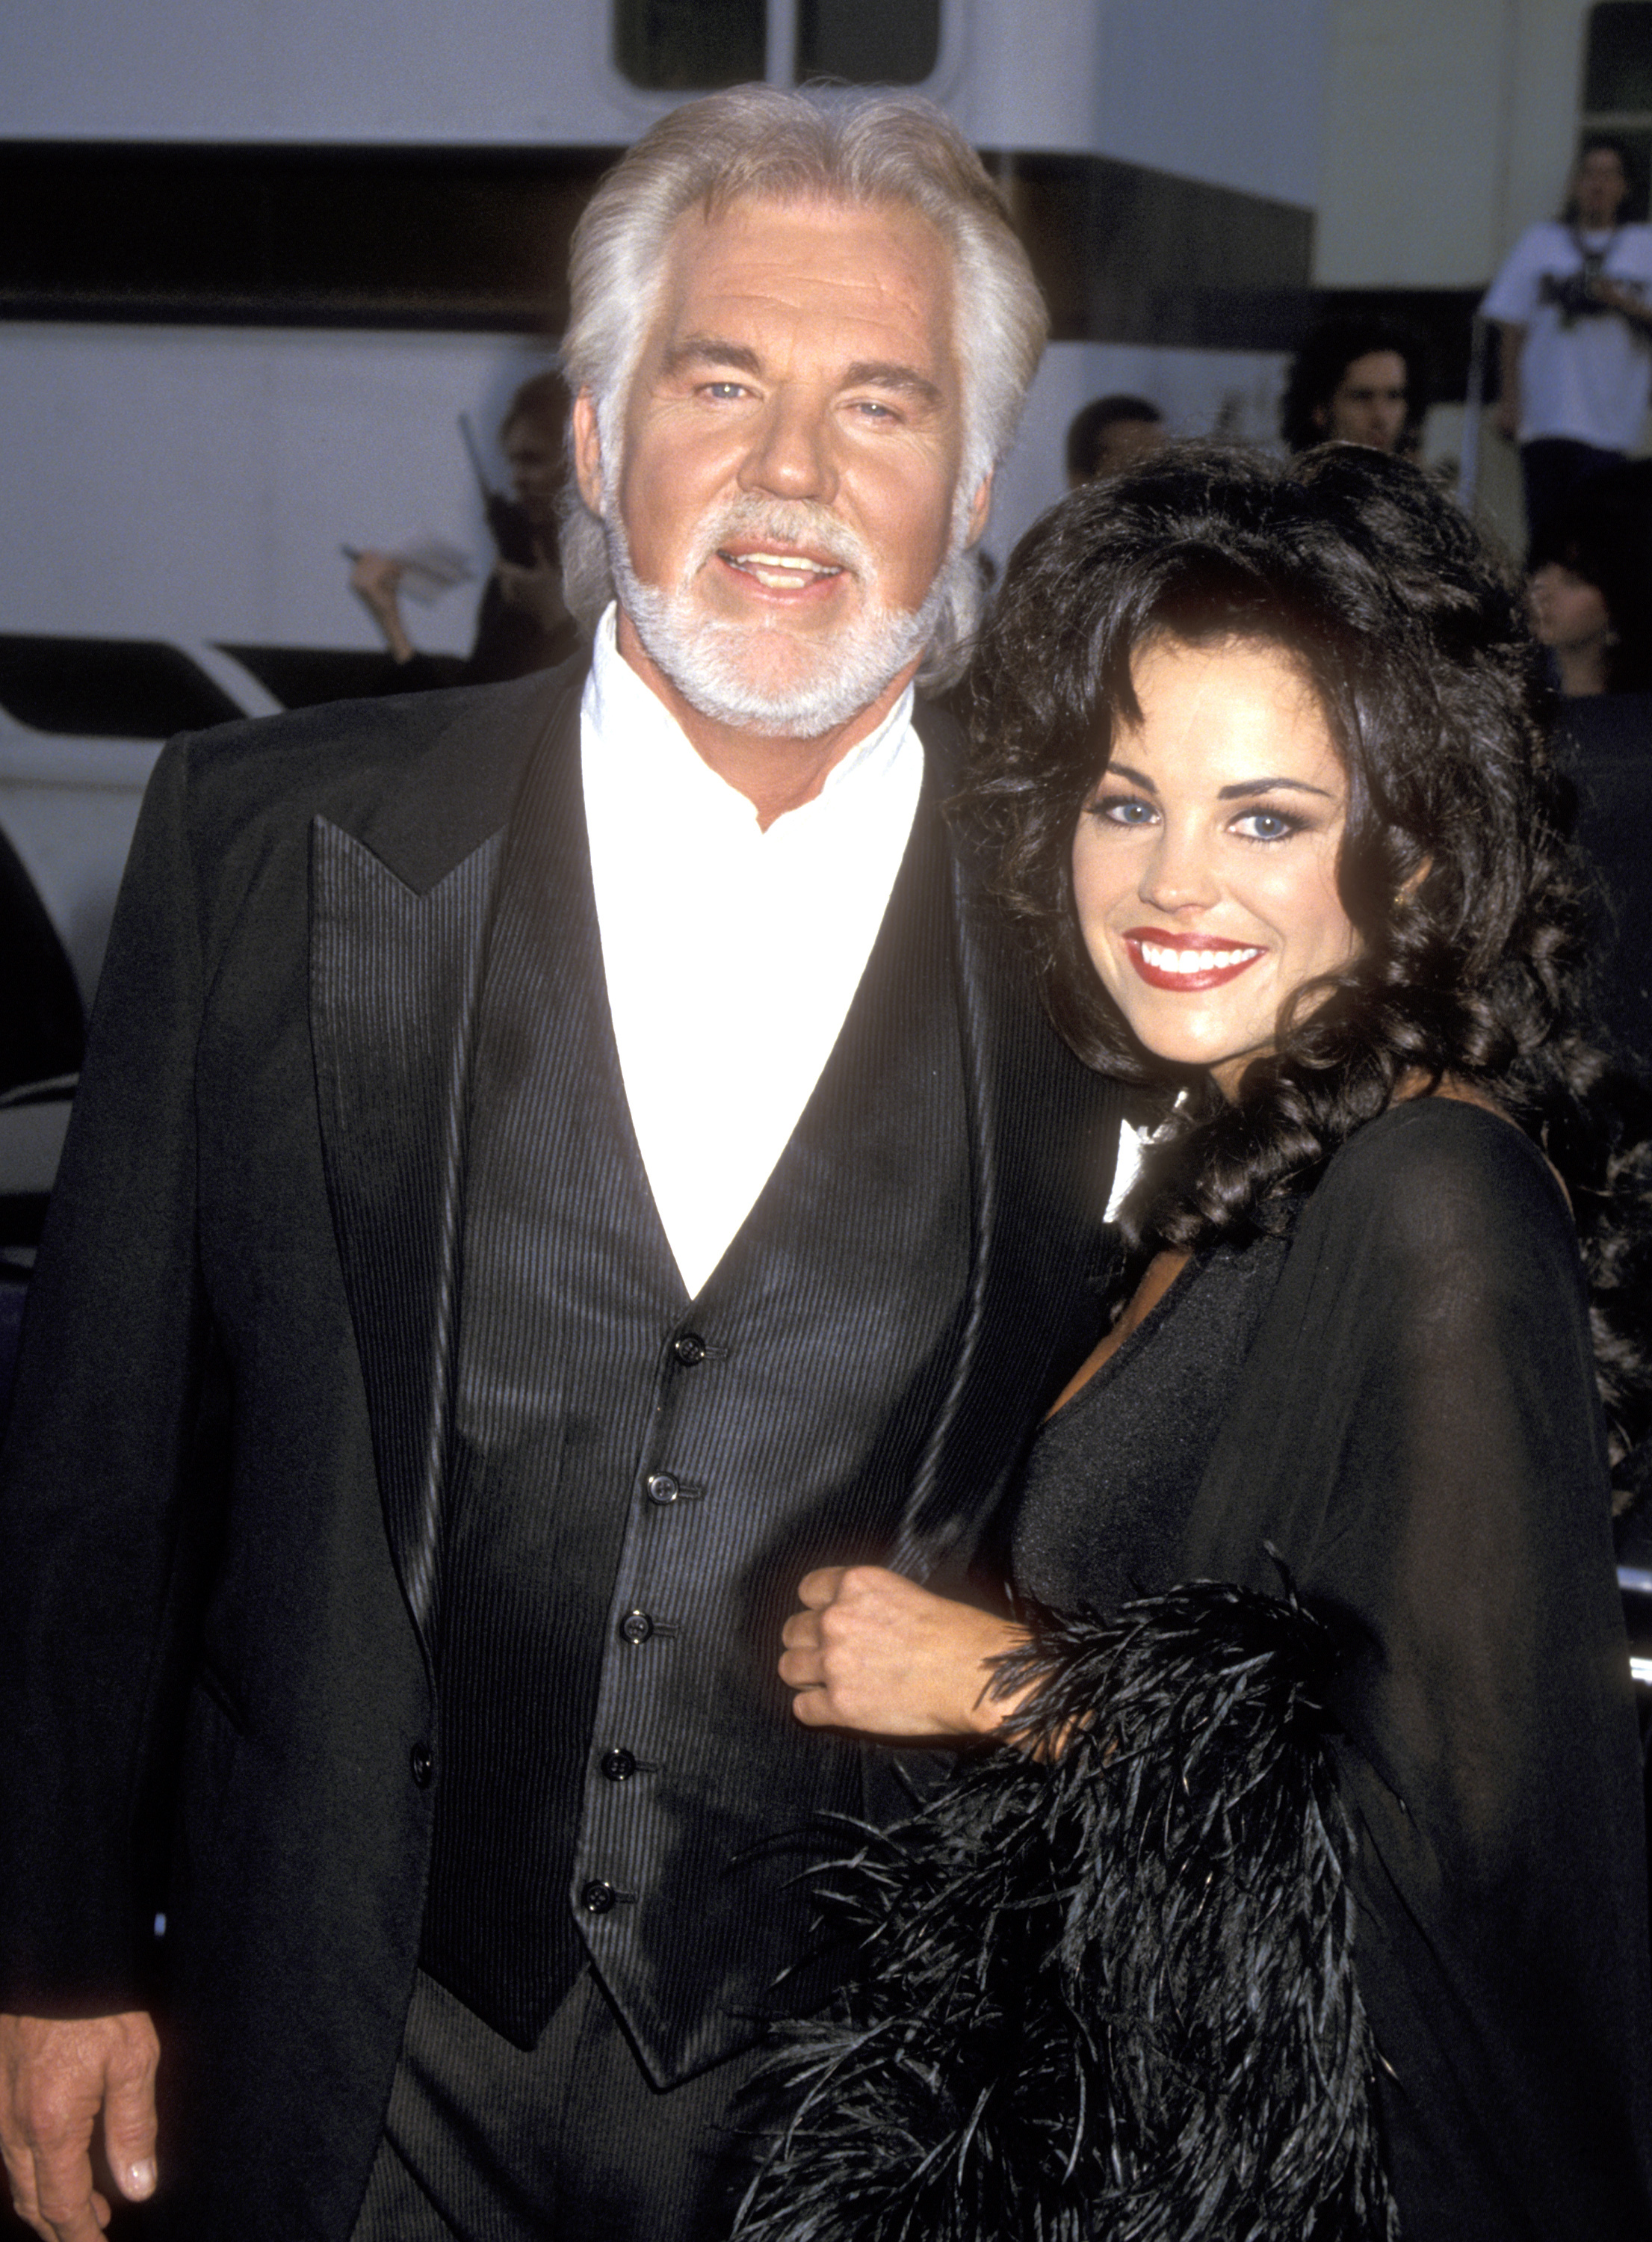 Kenny Rogers and his wife Wanda Miller at the 22nd Annual American Music Awards on January 30, 1995, in Los Angeles, California | Source: Getty Images